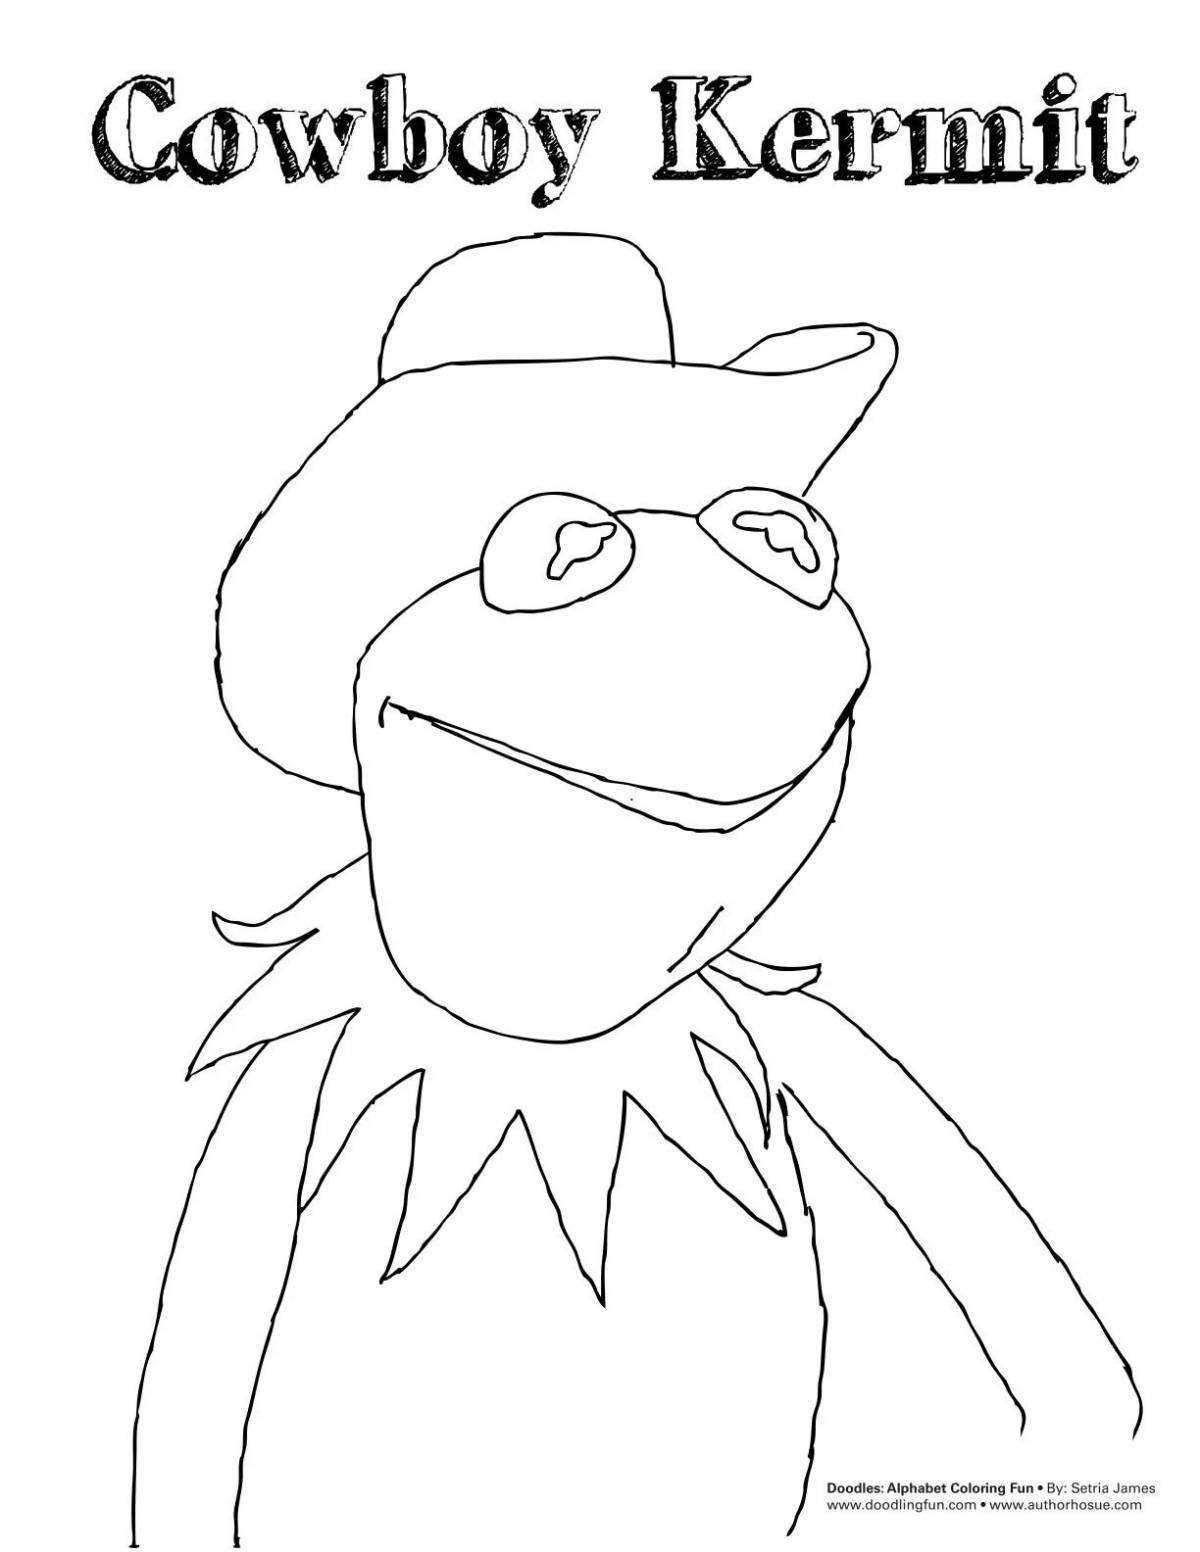 Coloring page adorable frog meme